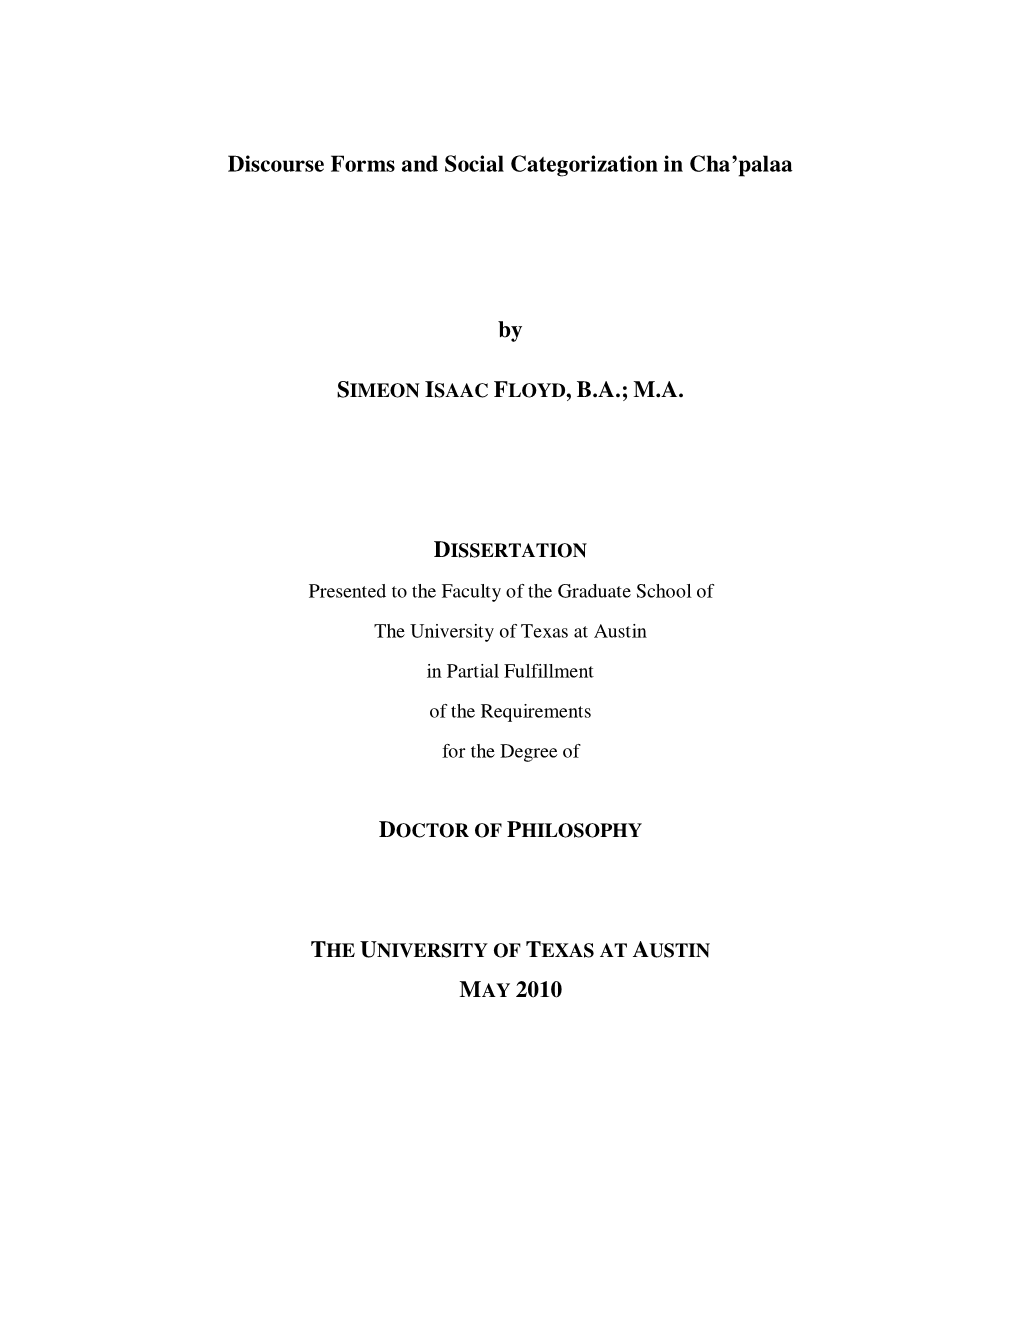 Discourse Forms and Social Categorization in Cha'palaa By